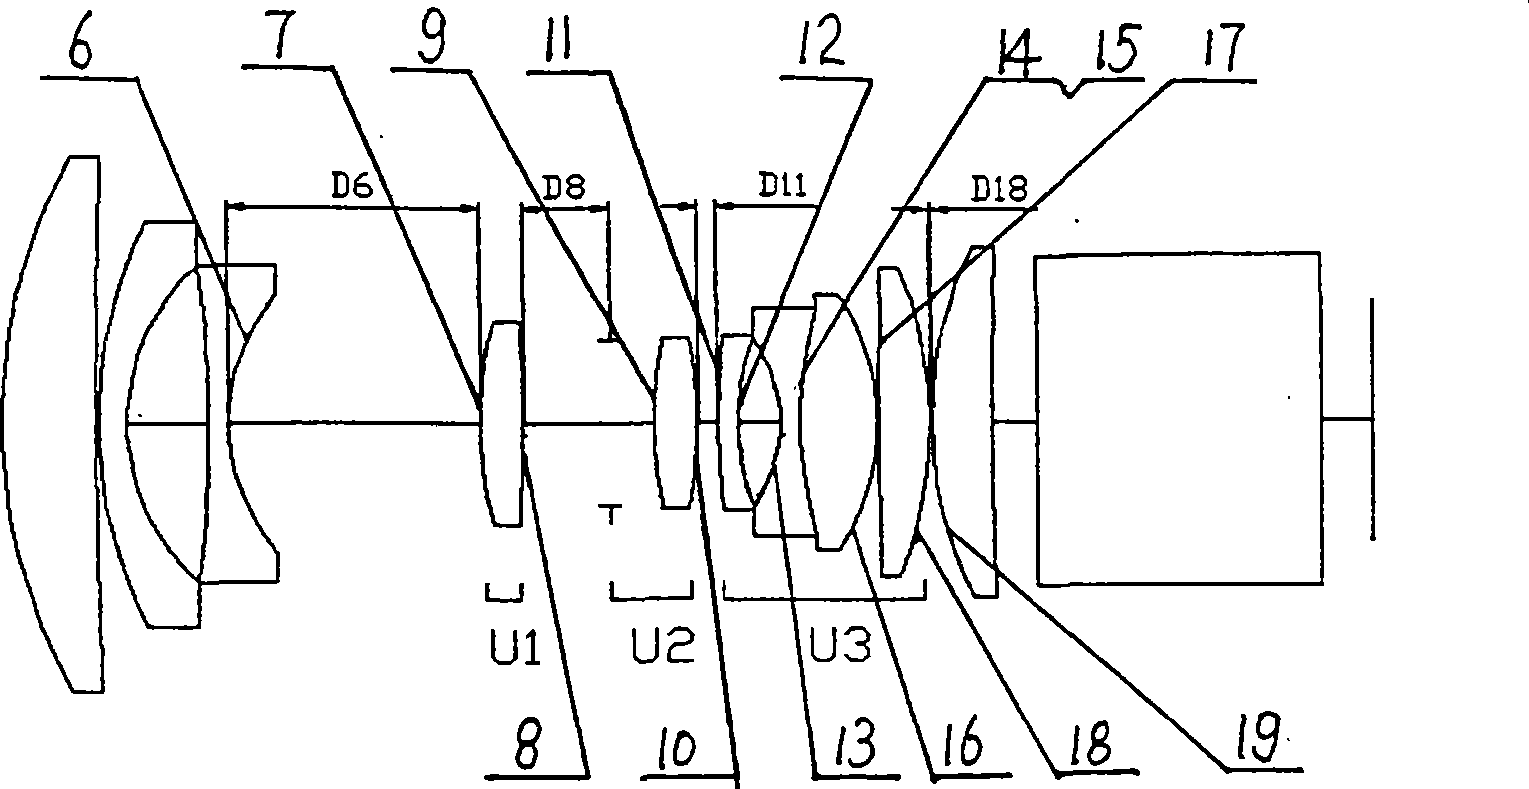 Computer-aided design method for cam curve of three-component zooming system